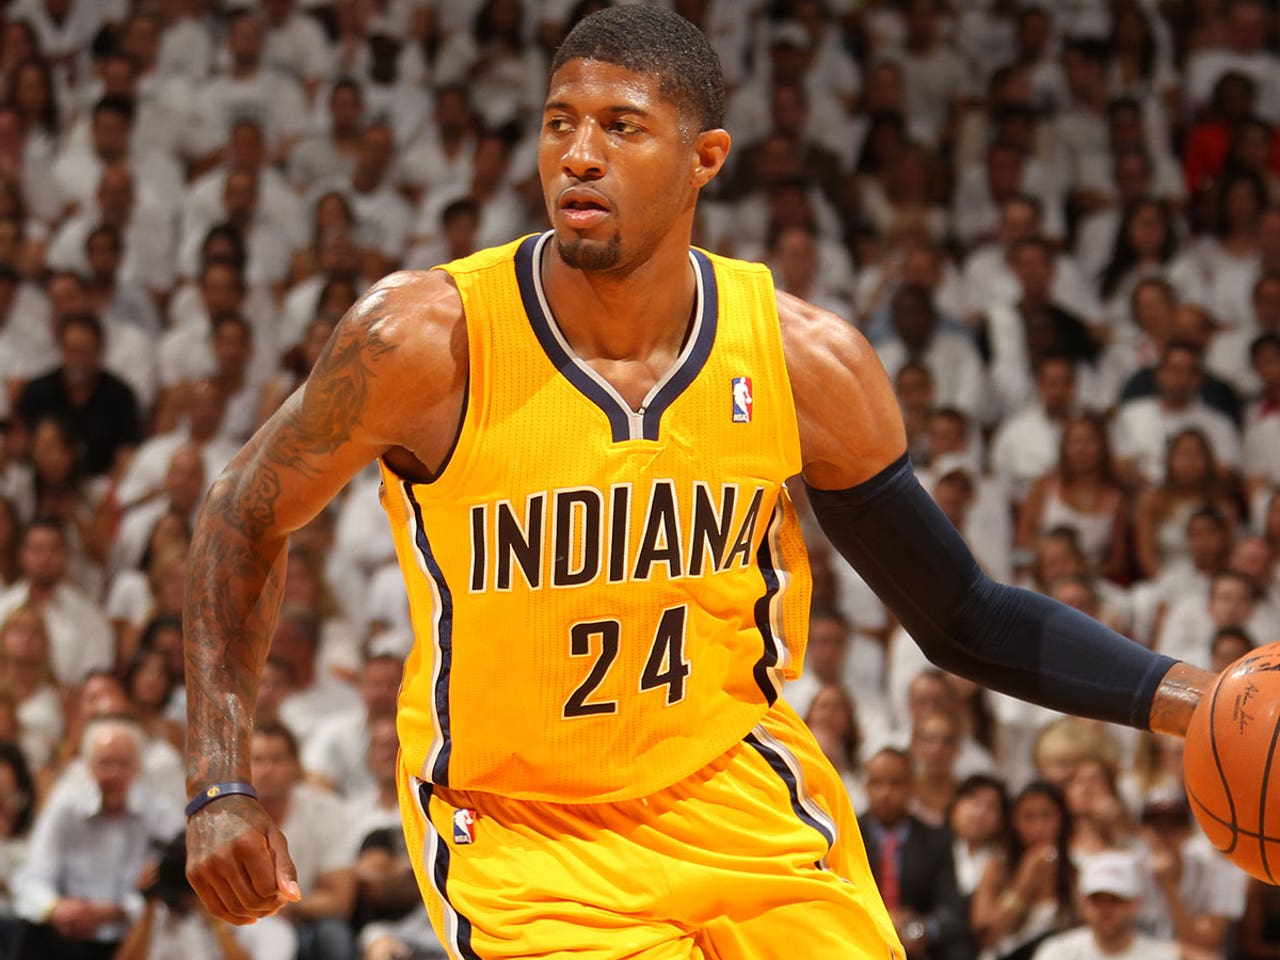 Paul George will change number to 13, embrace awful 'PG-13' nickname 